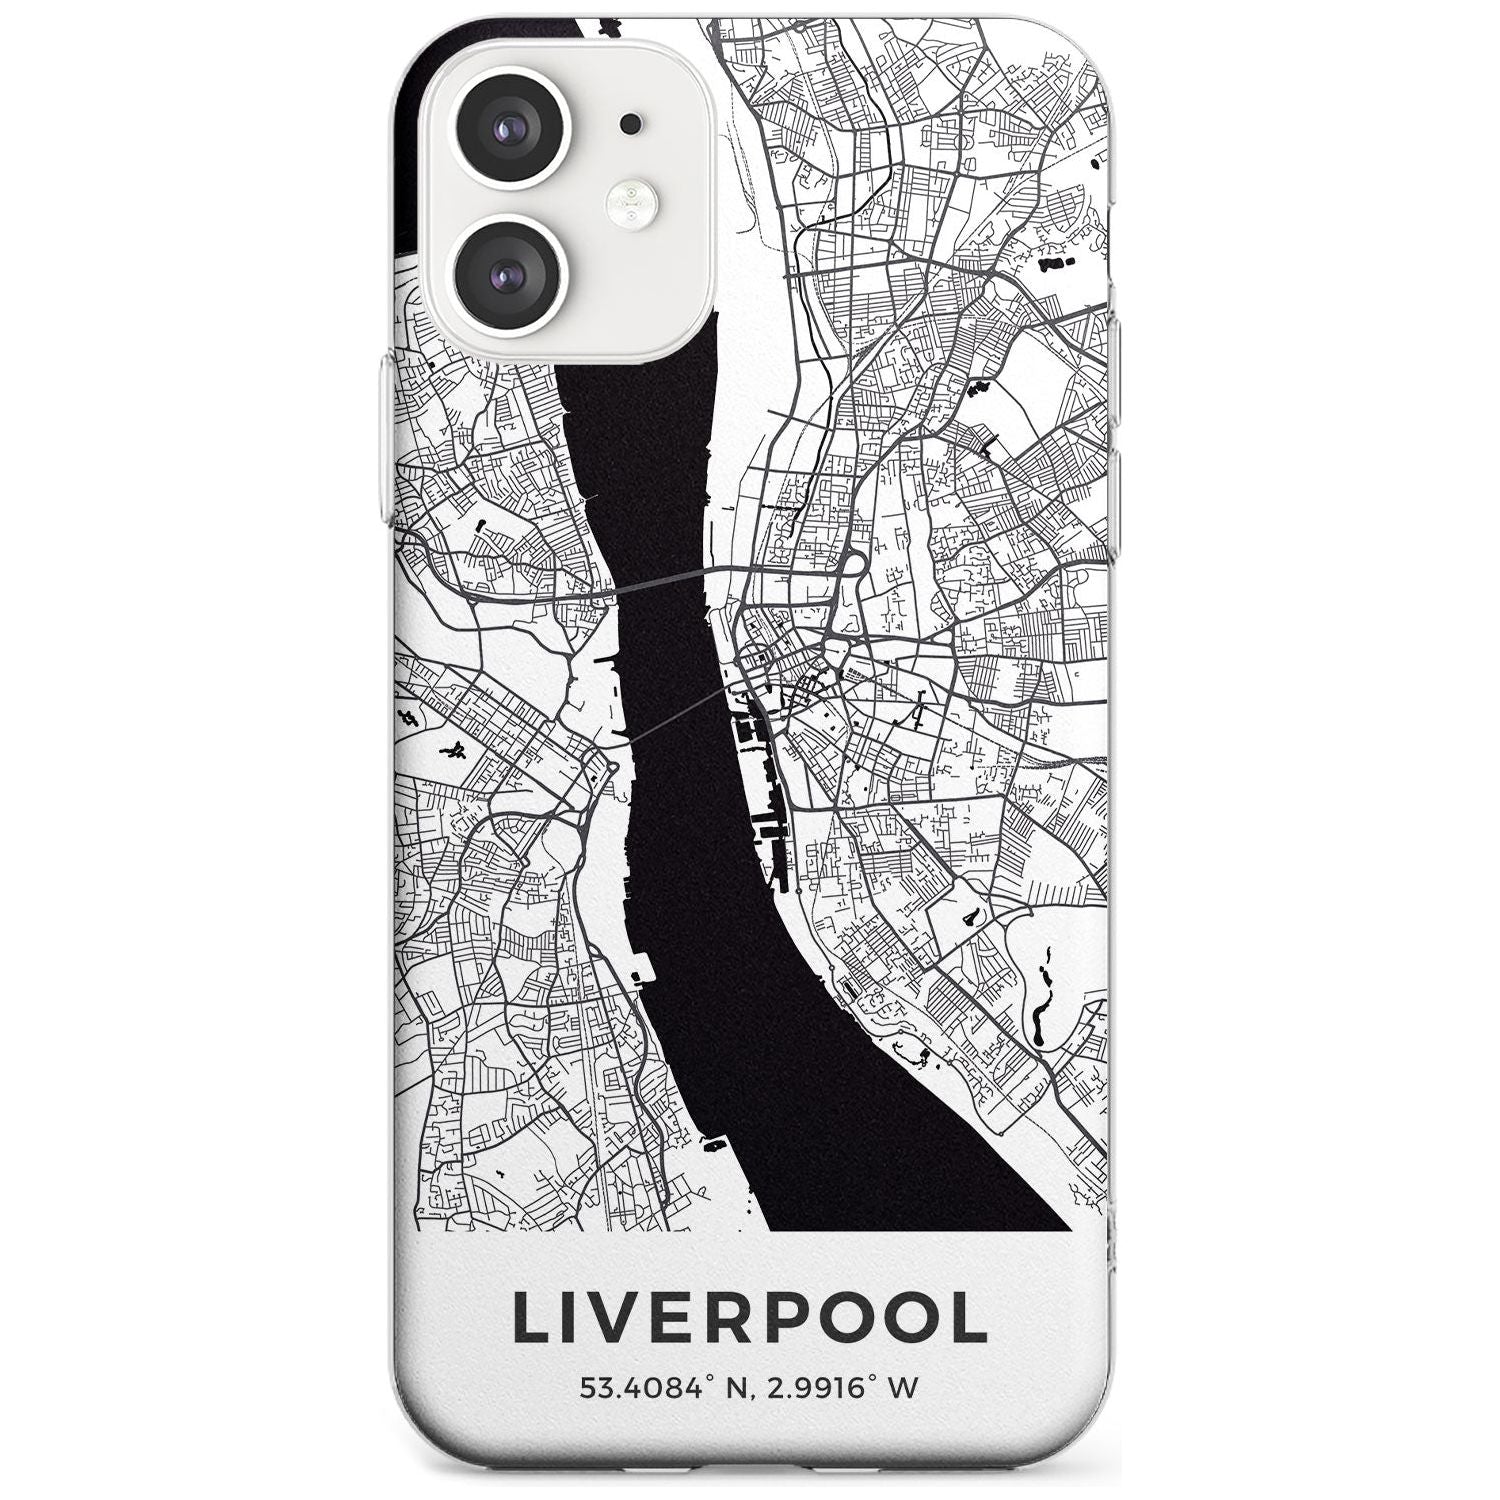 Map of Liverpool, England Slim TPU Phone Case for iPhone 11